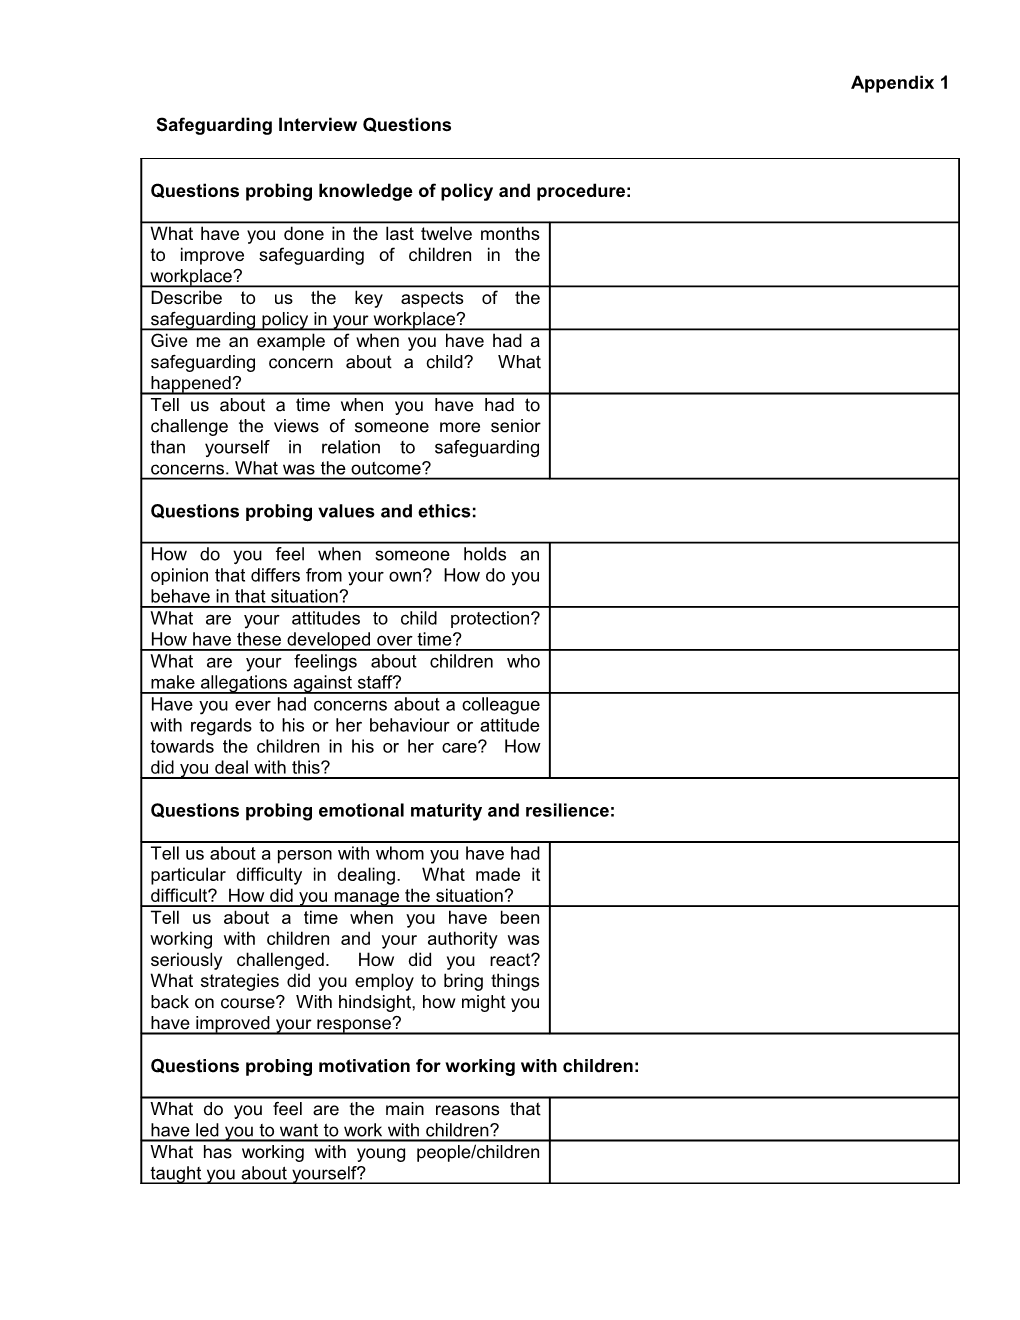 Sample Safeguarding Interview Questions